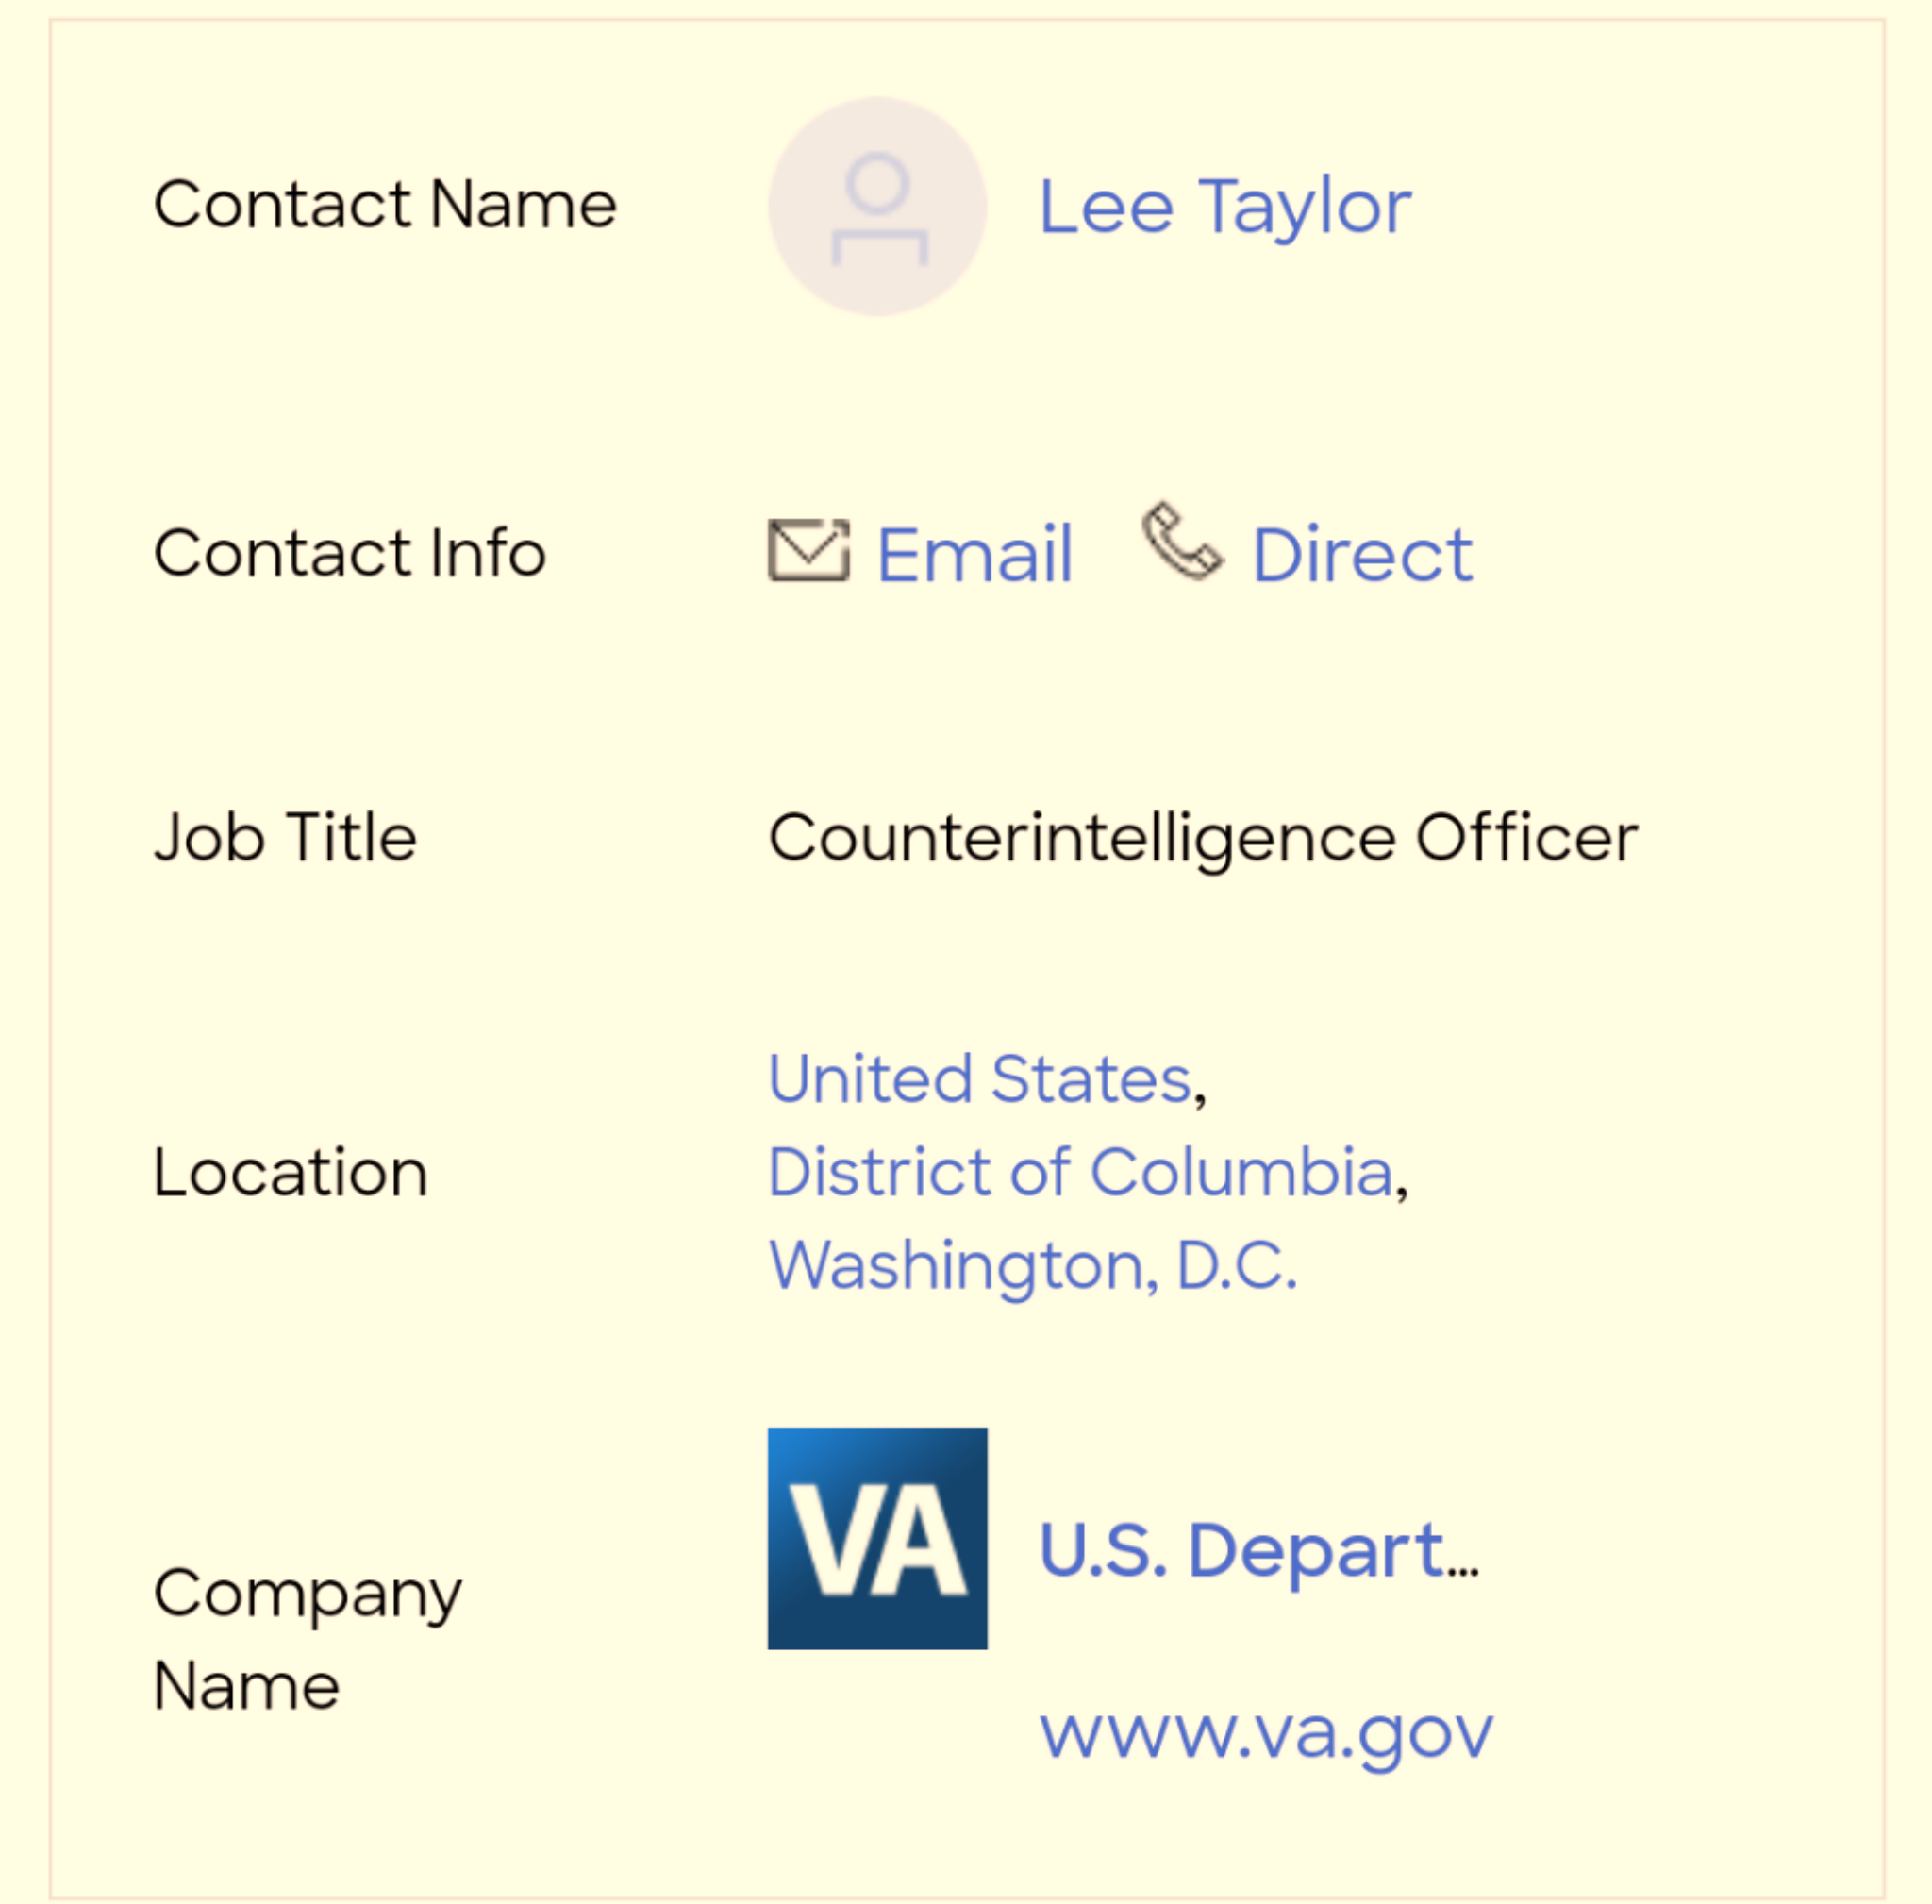 Contact Name: Lee Taylor Contact Info: Email & Direct Job Title: Counterintelligence Officer Location: United States, District of Columbia, Washington, D.C. Company: U.S. Department of Veteran Affairs Name: www.va.gov